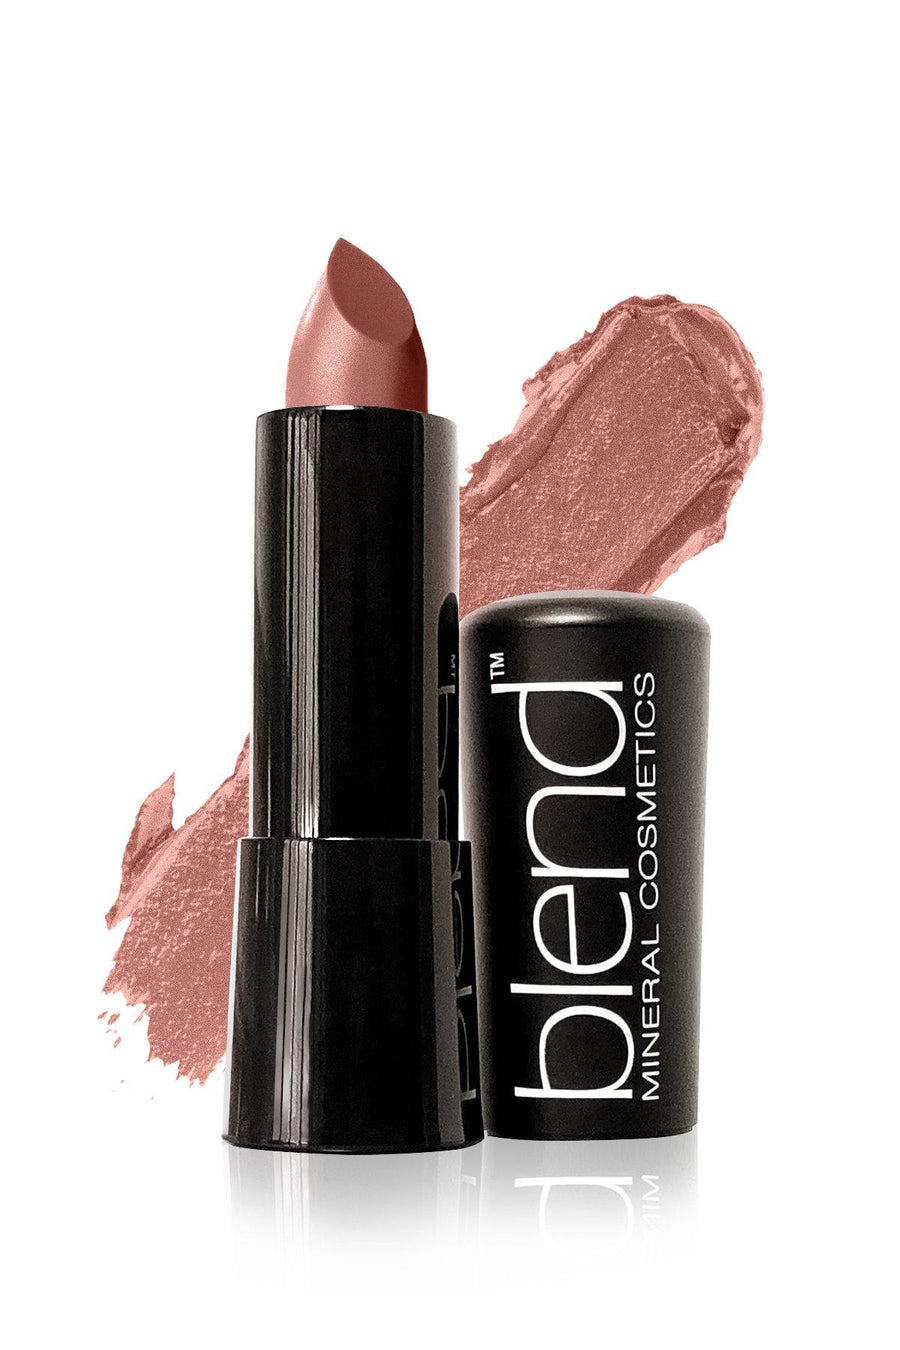 Lipstick #2 - Nude Pink - Blend Mineral Cosmetics